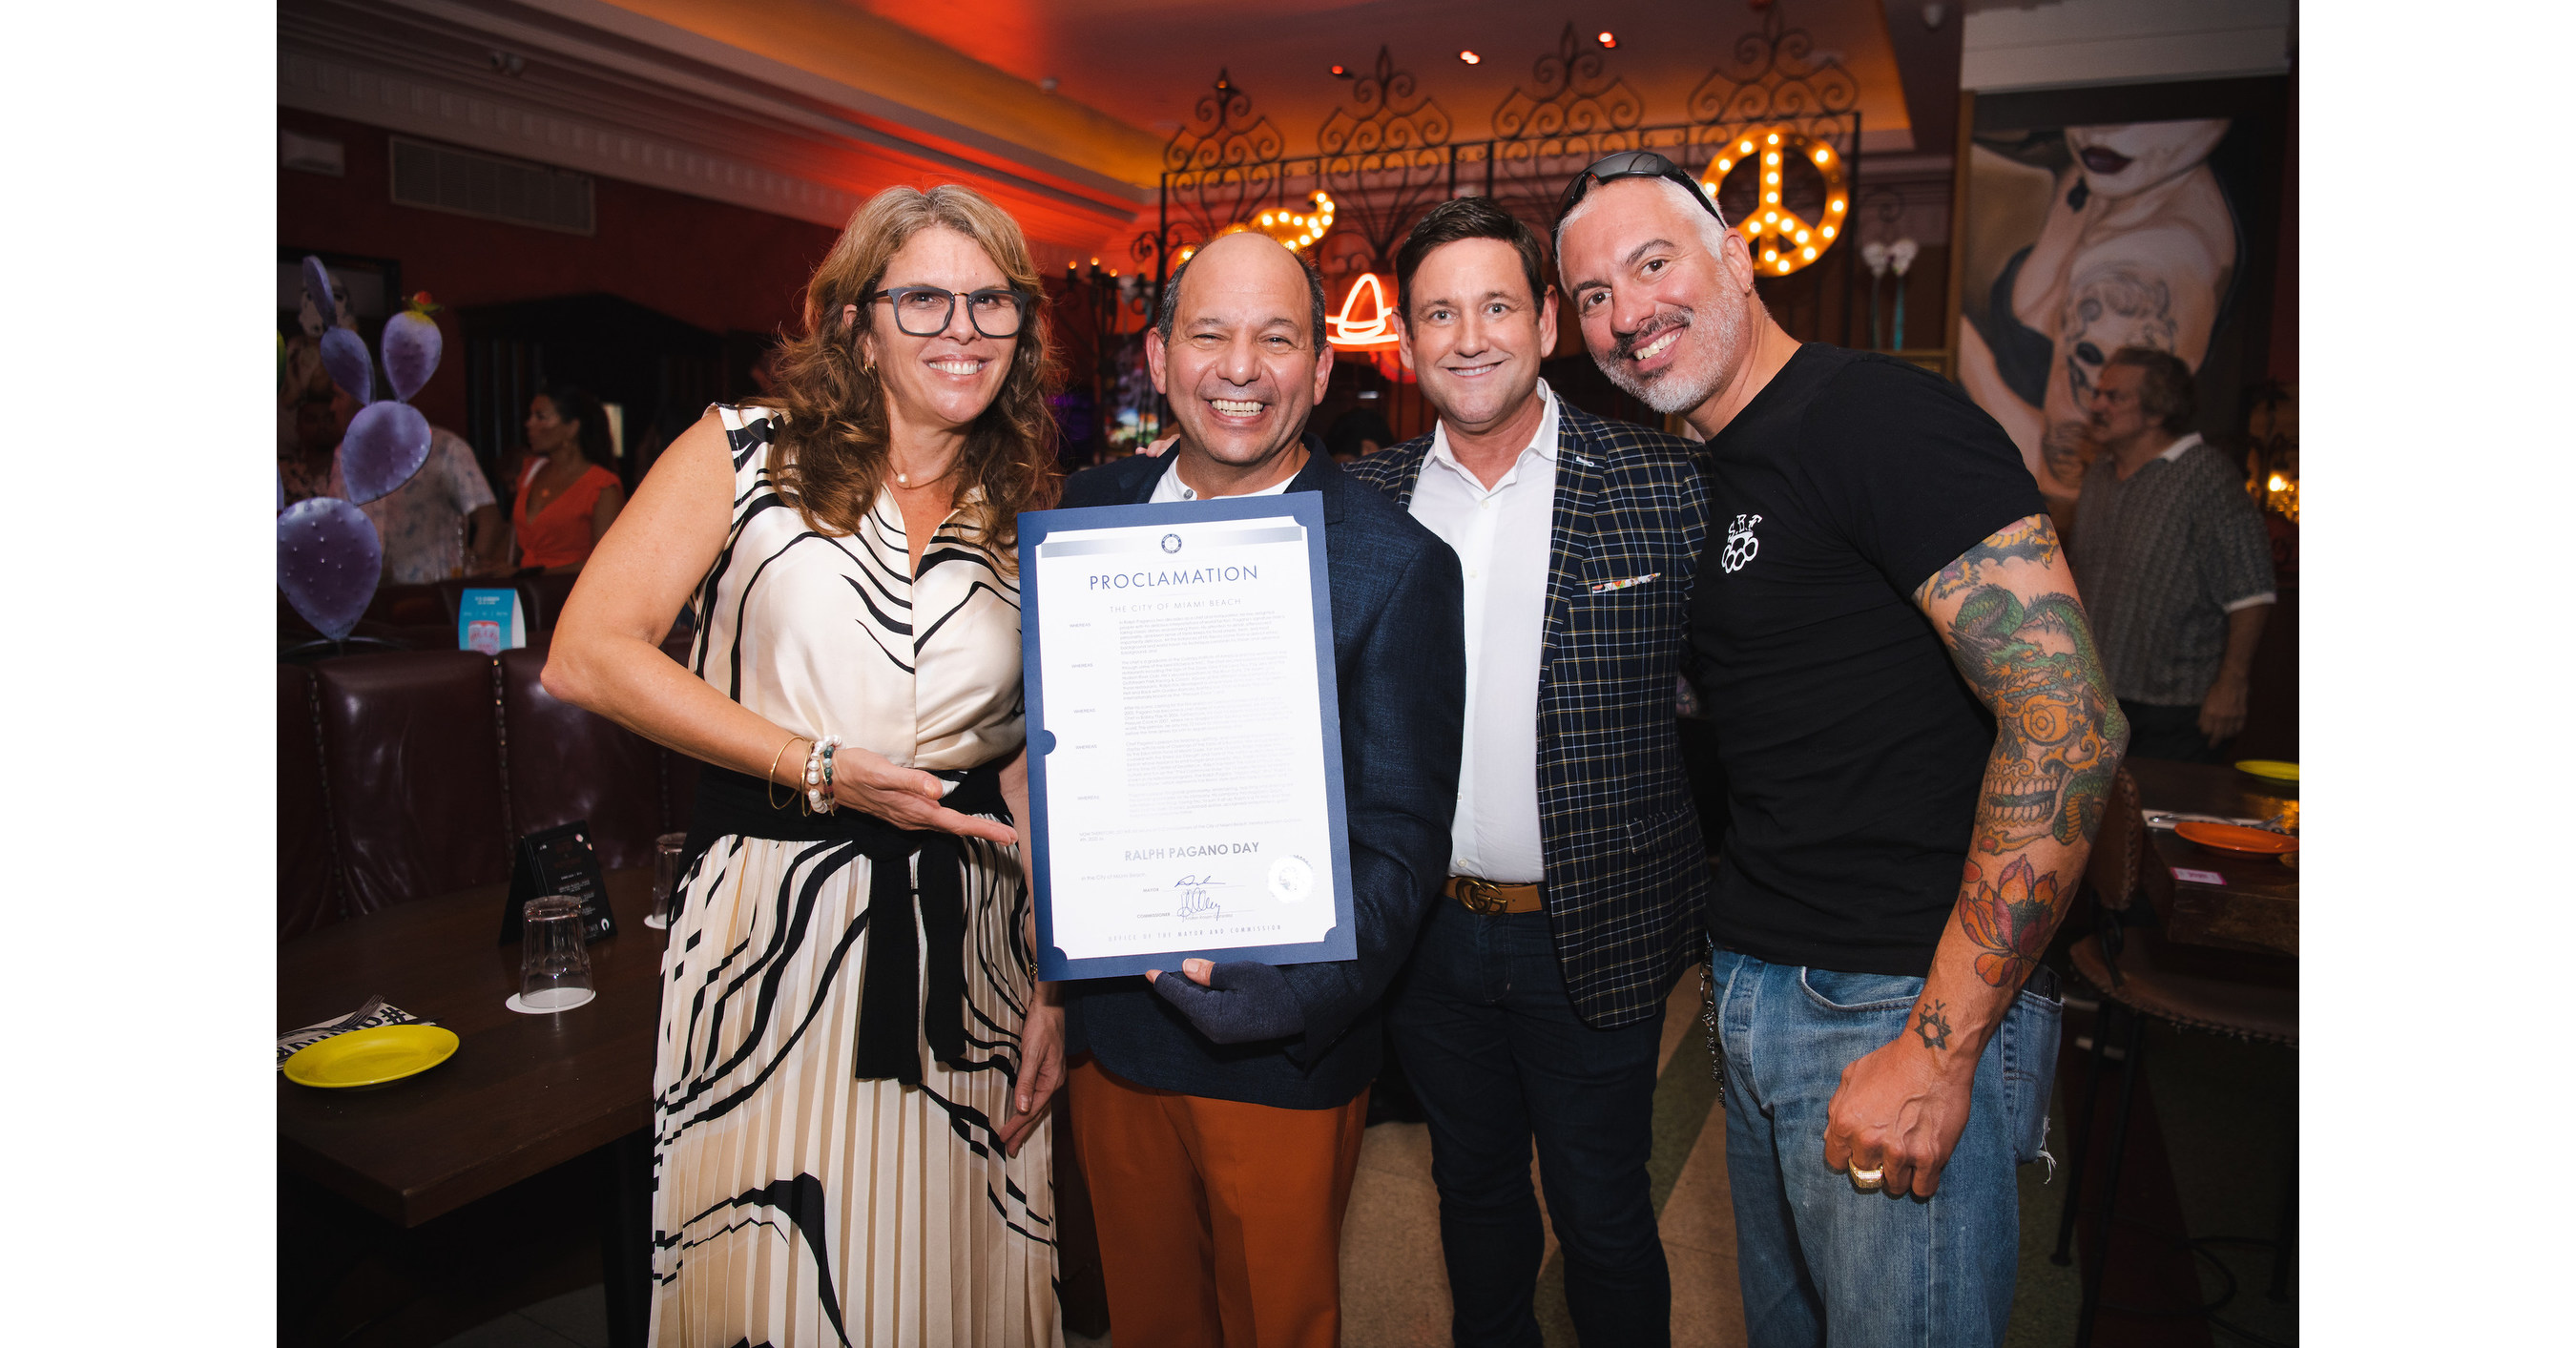 Celebrating 21 Years in South Florida, Celebrity Chef Ralph Pagano Received Proclamation From the City of Miami Beach